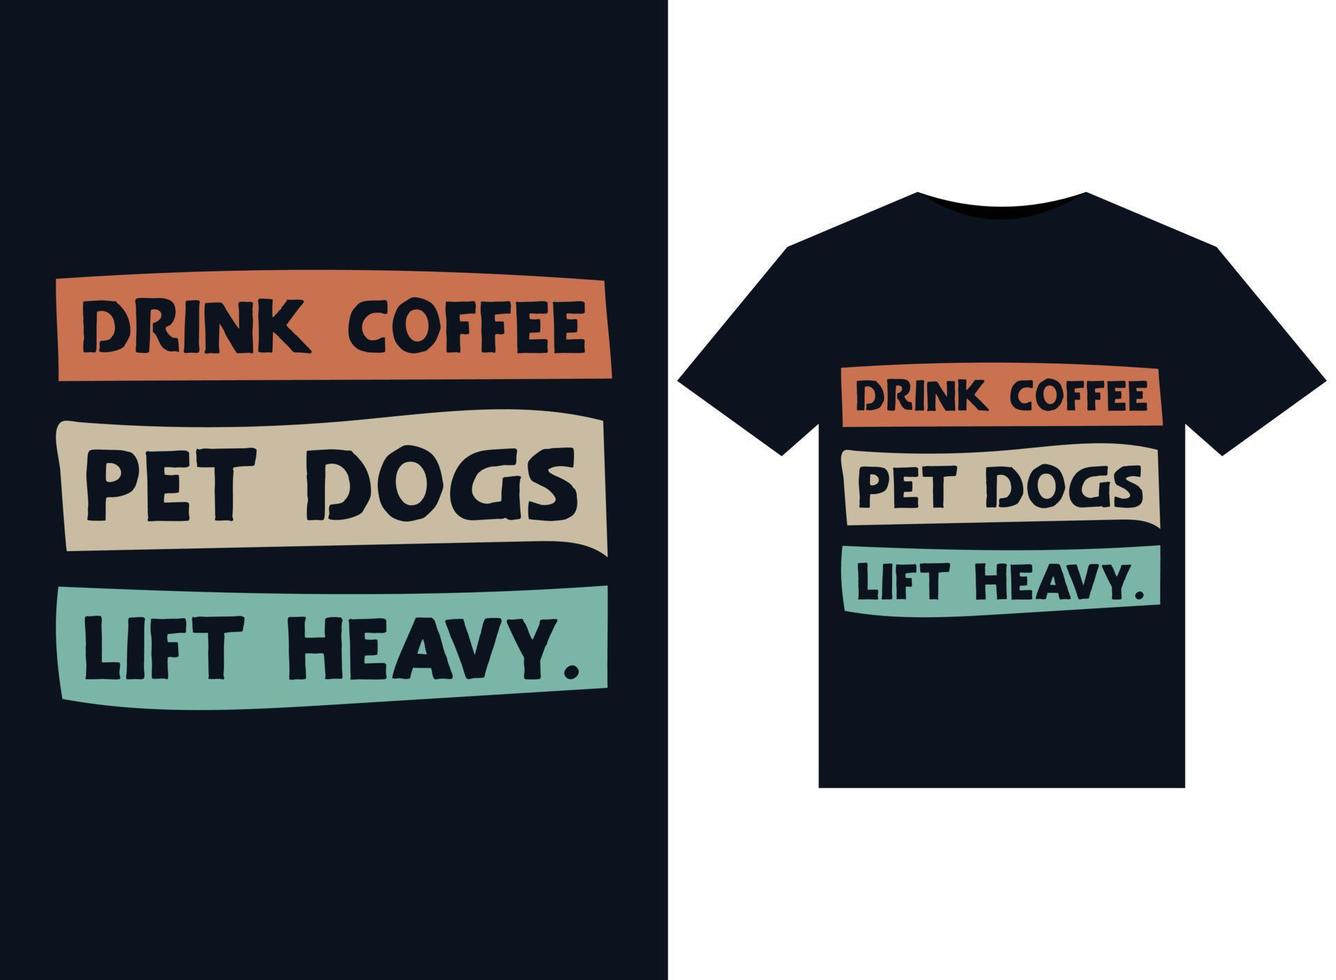 Drink Coffee. Pet Dogs. Lift Heavy. illustrations for print-ready T-Shirts design vector